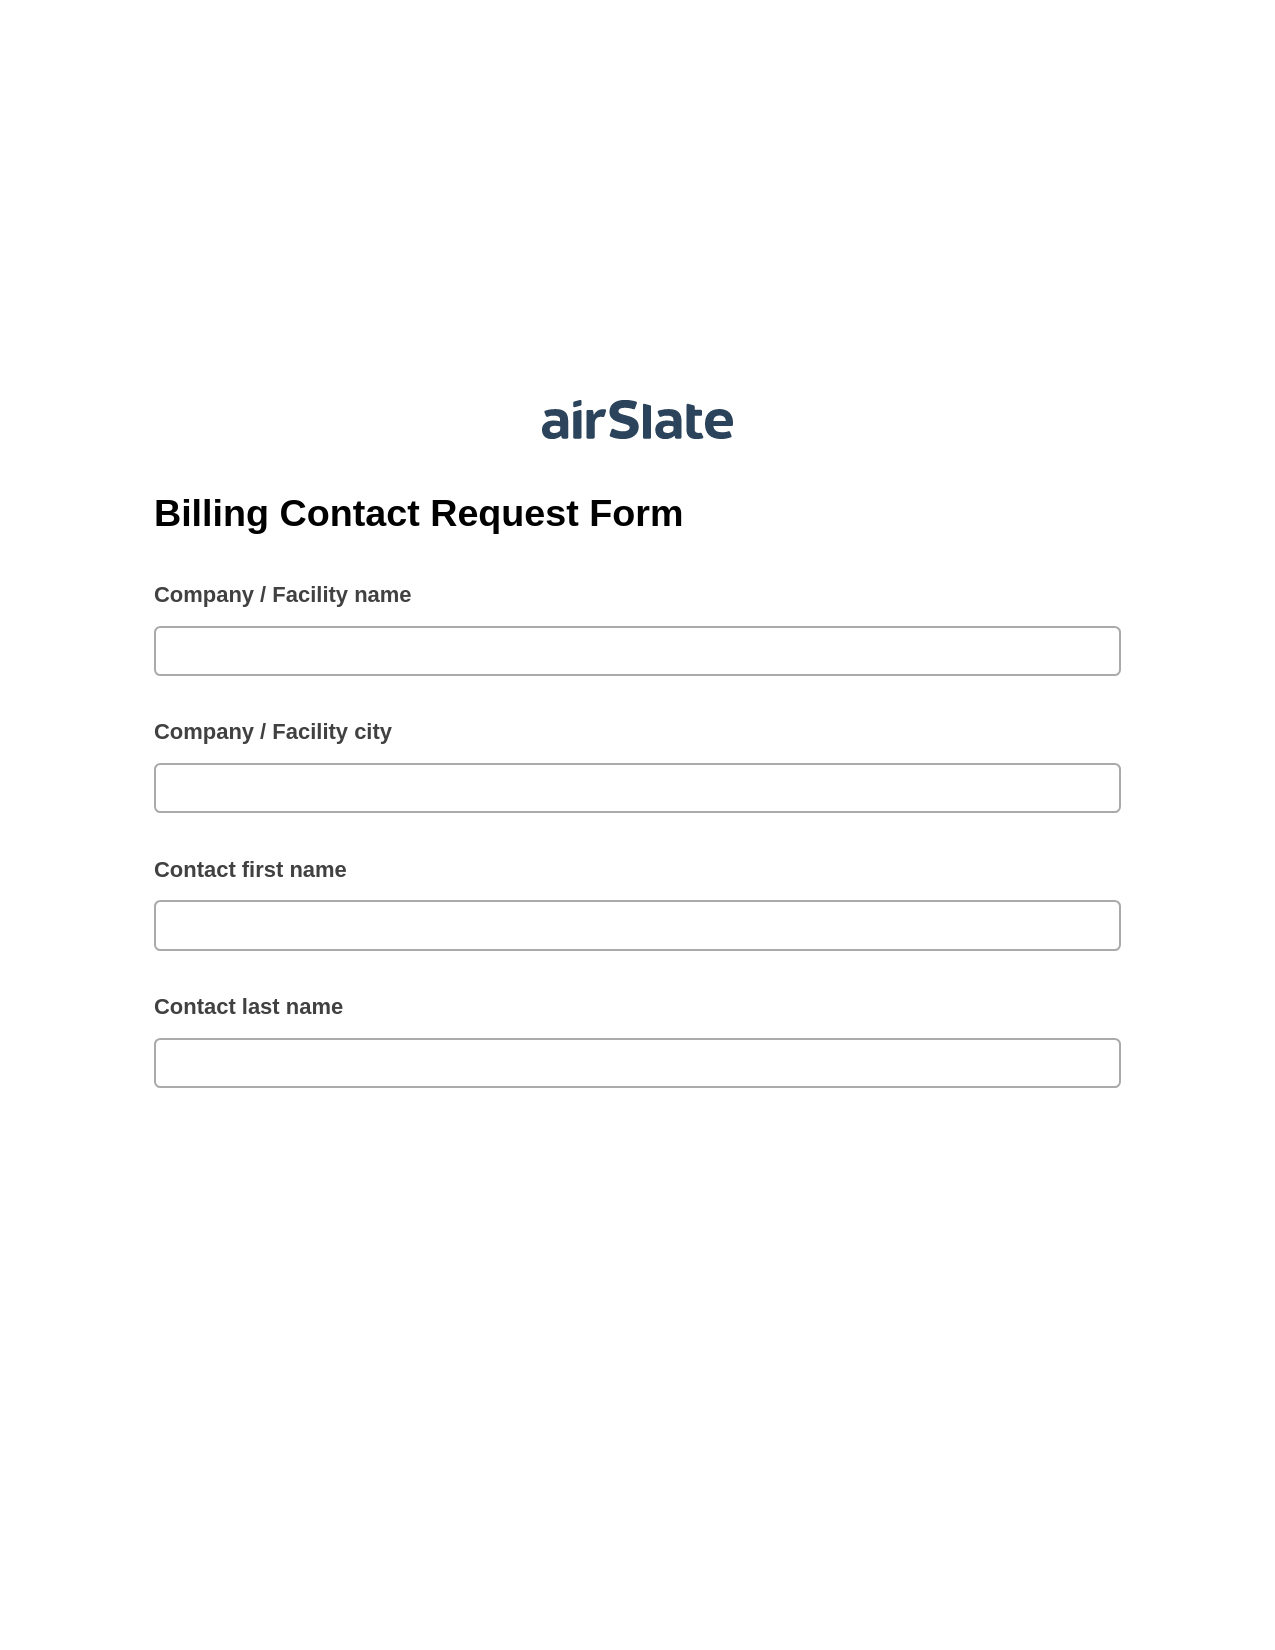 Multirole Billing Contact Request Form Pre-fill from Google Sheets Bot, Hide Signatures Bot, Email Notification Postfinish Bot